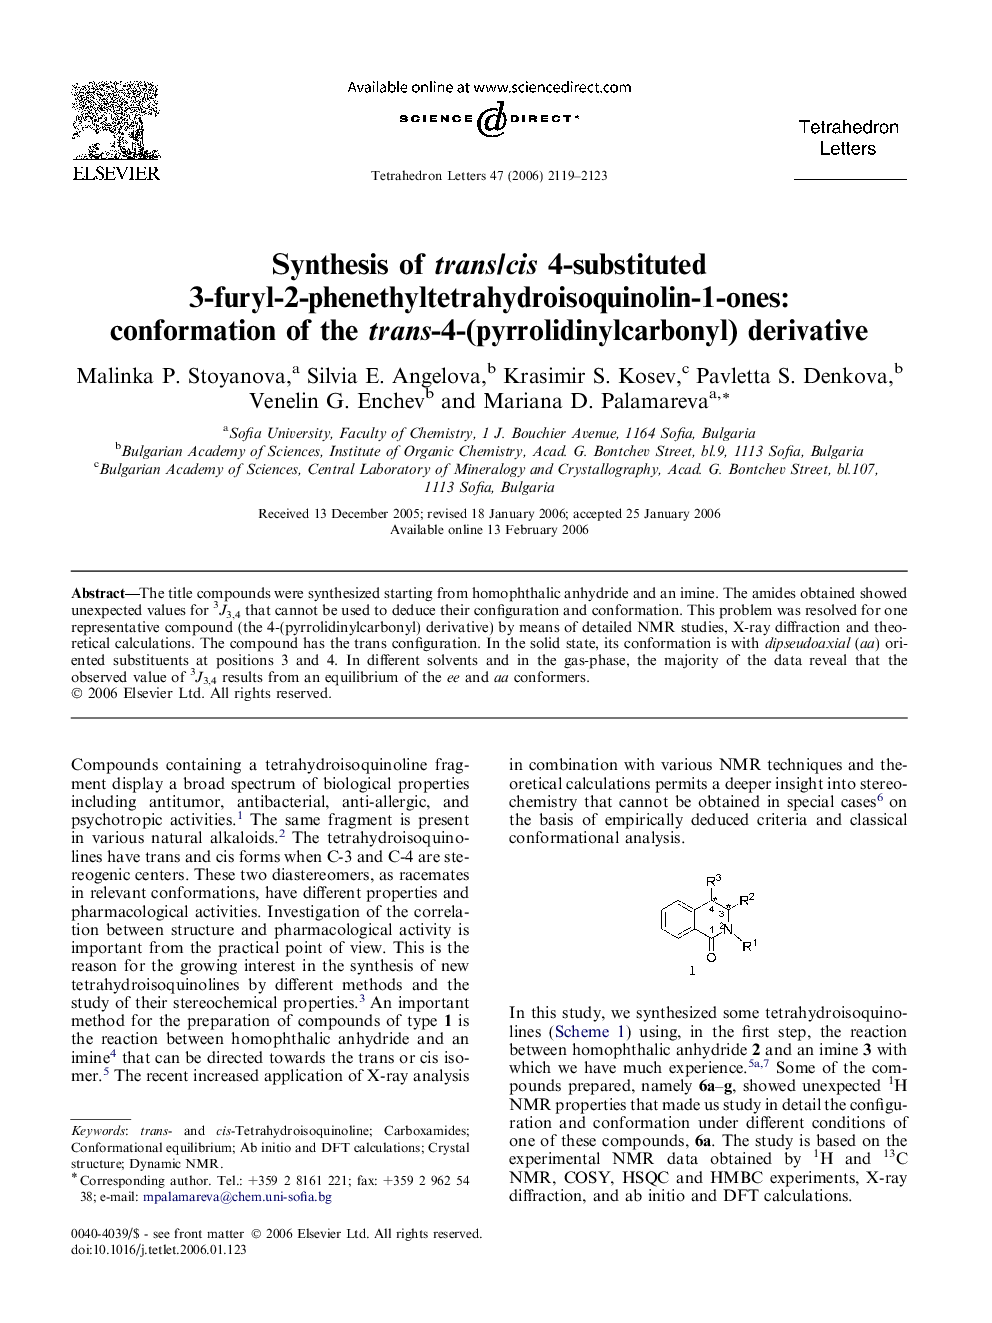 Synthesis of trans/cis 4-substituted 3-furyl-2-phenethyltetrahydroisoquinolin-1-ones: conformation of the trans-4-(pyrrolidinylcarbonyl) derivative